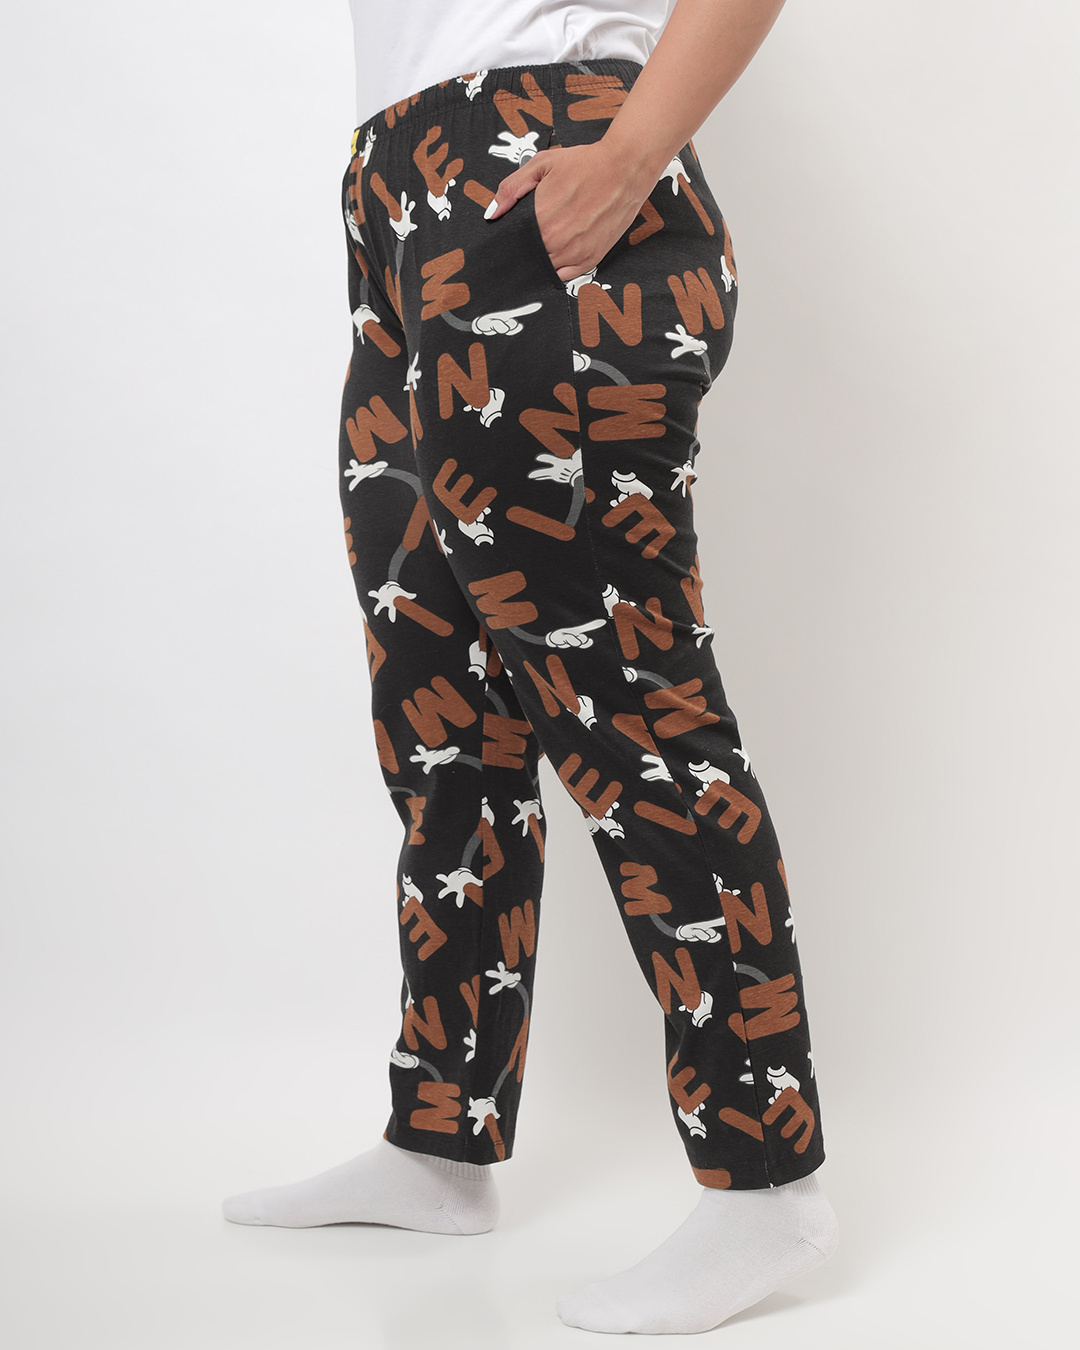 Shop Women's All over printed Plus Size Pyjama-Back